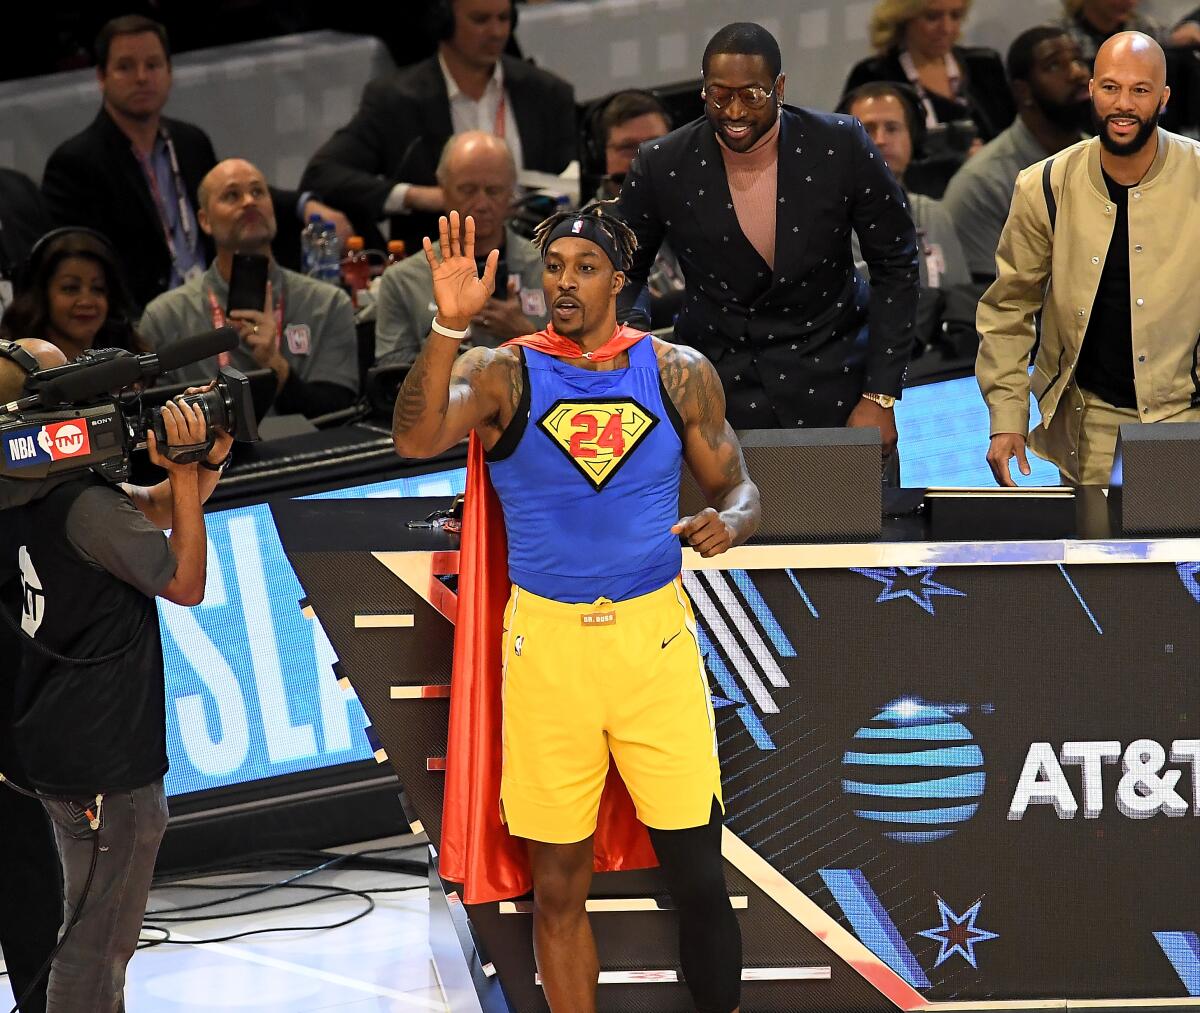 Dwight Howard wears No. 24 during the Slam Dunk Contest on Saturday.